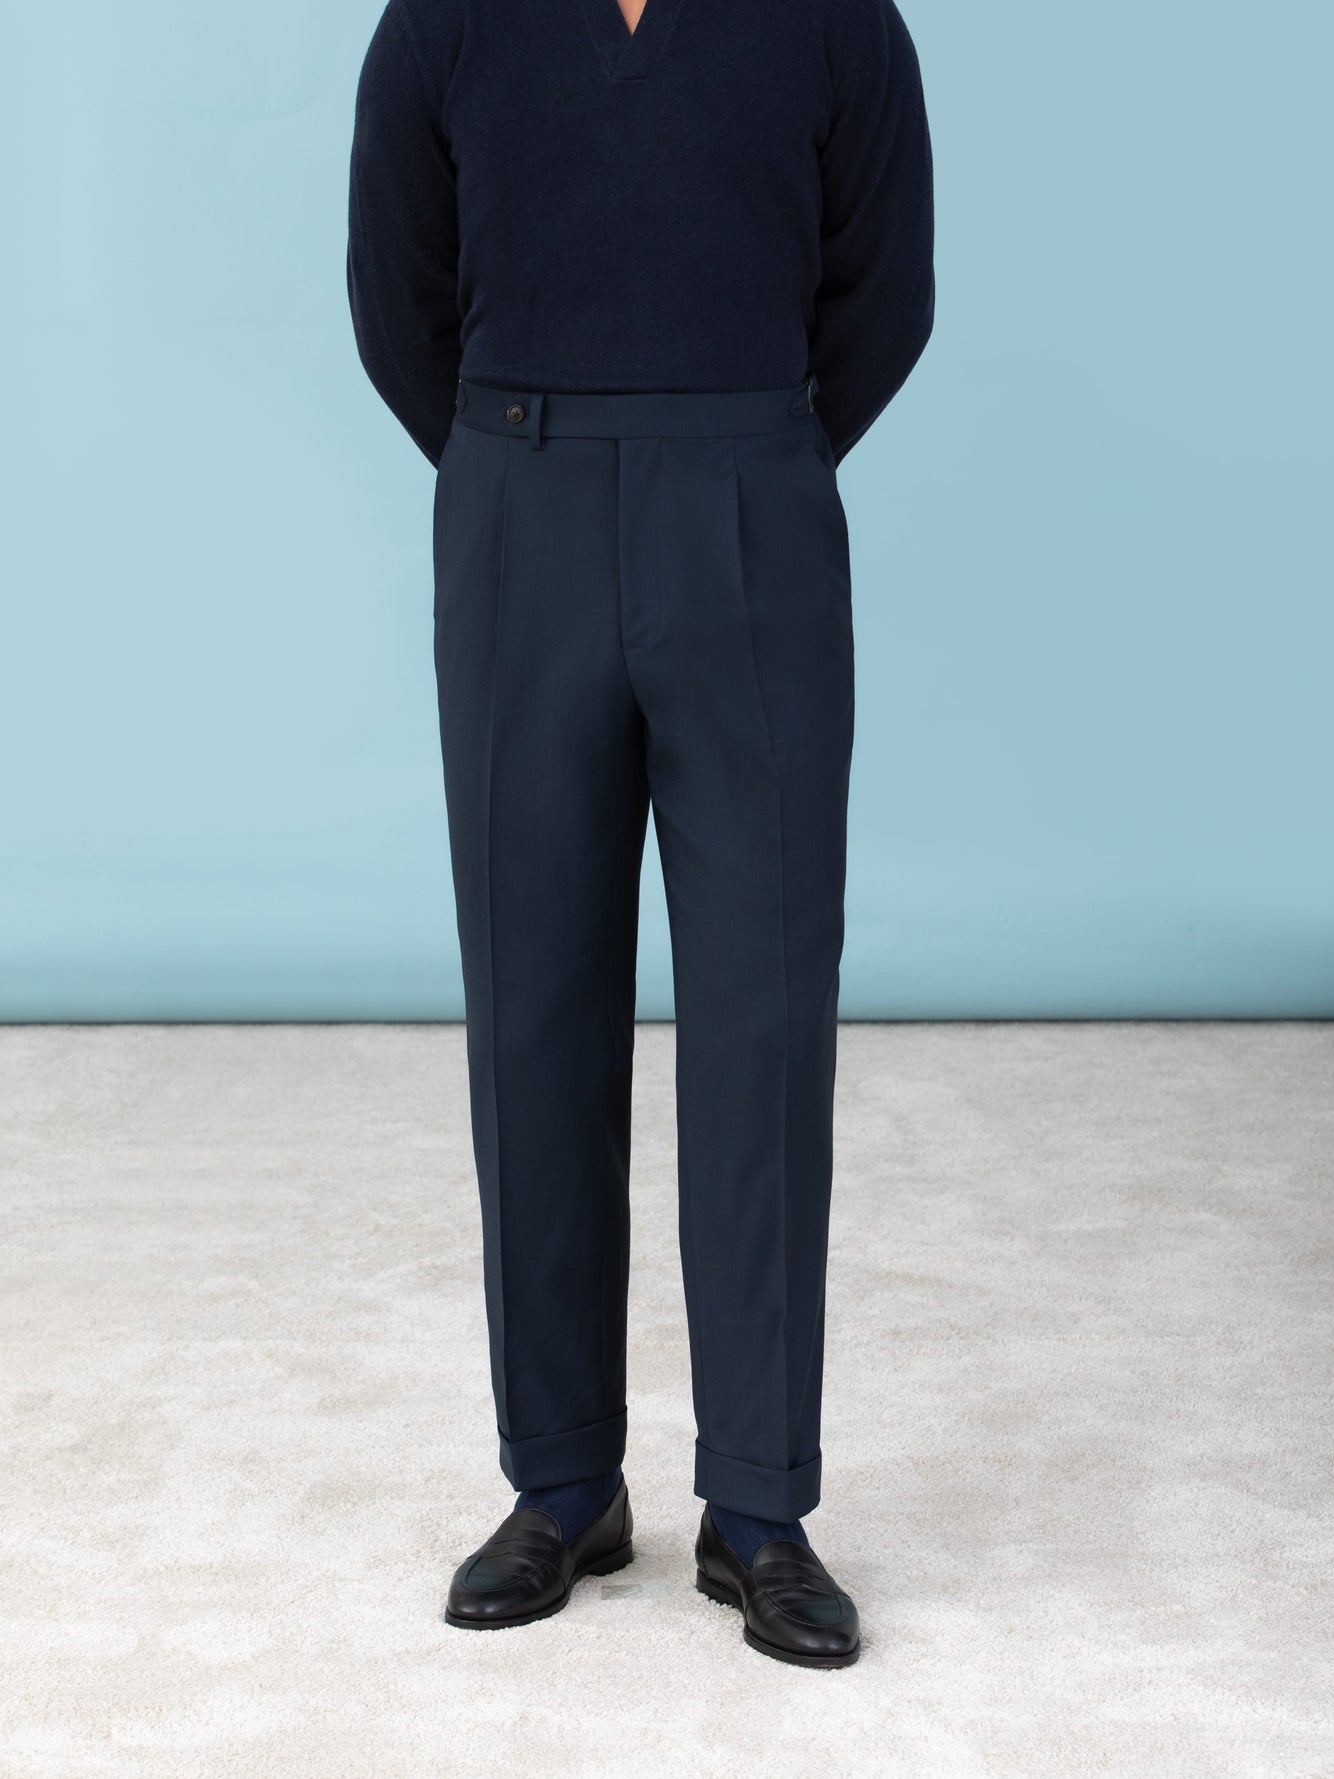 High-waisted tailored trousers - Navy - Ladies | H&M IN